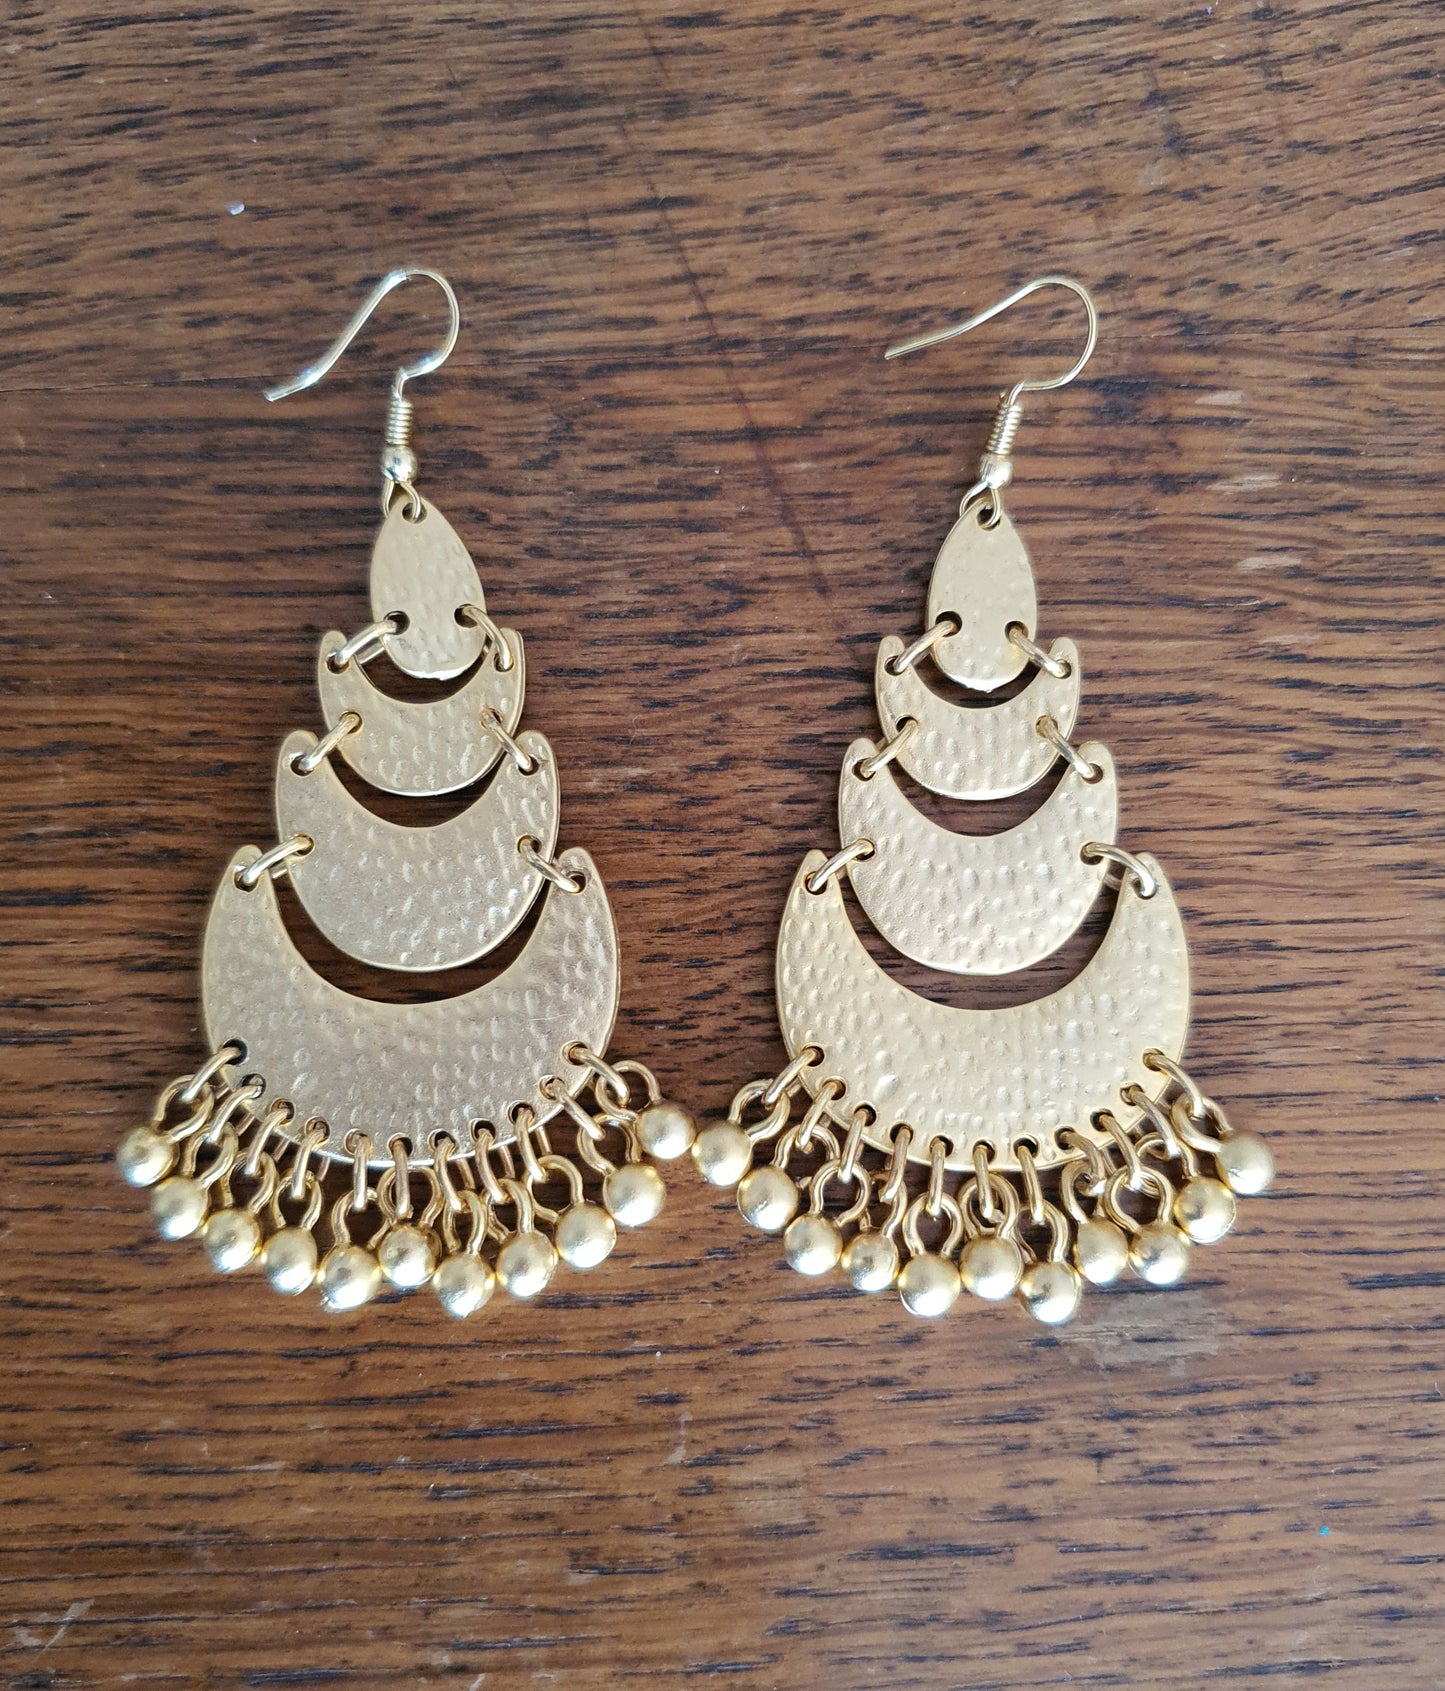 Earrings - Tiers of gold scallops adorned with tiny bells